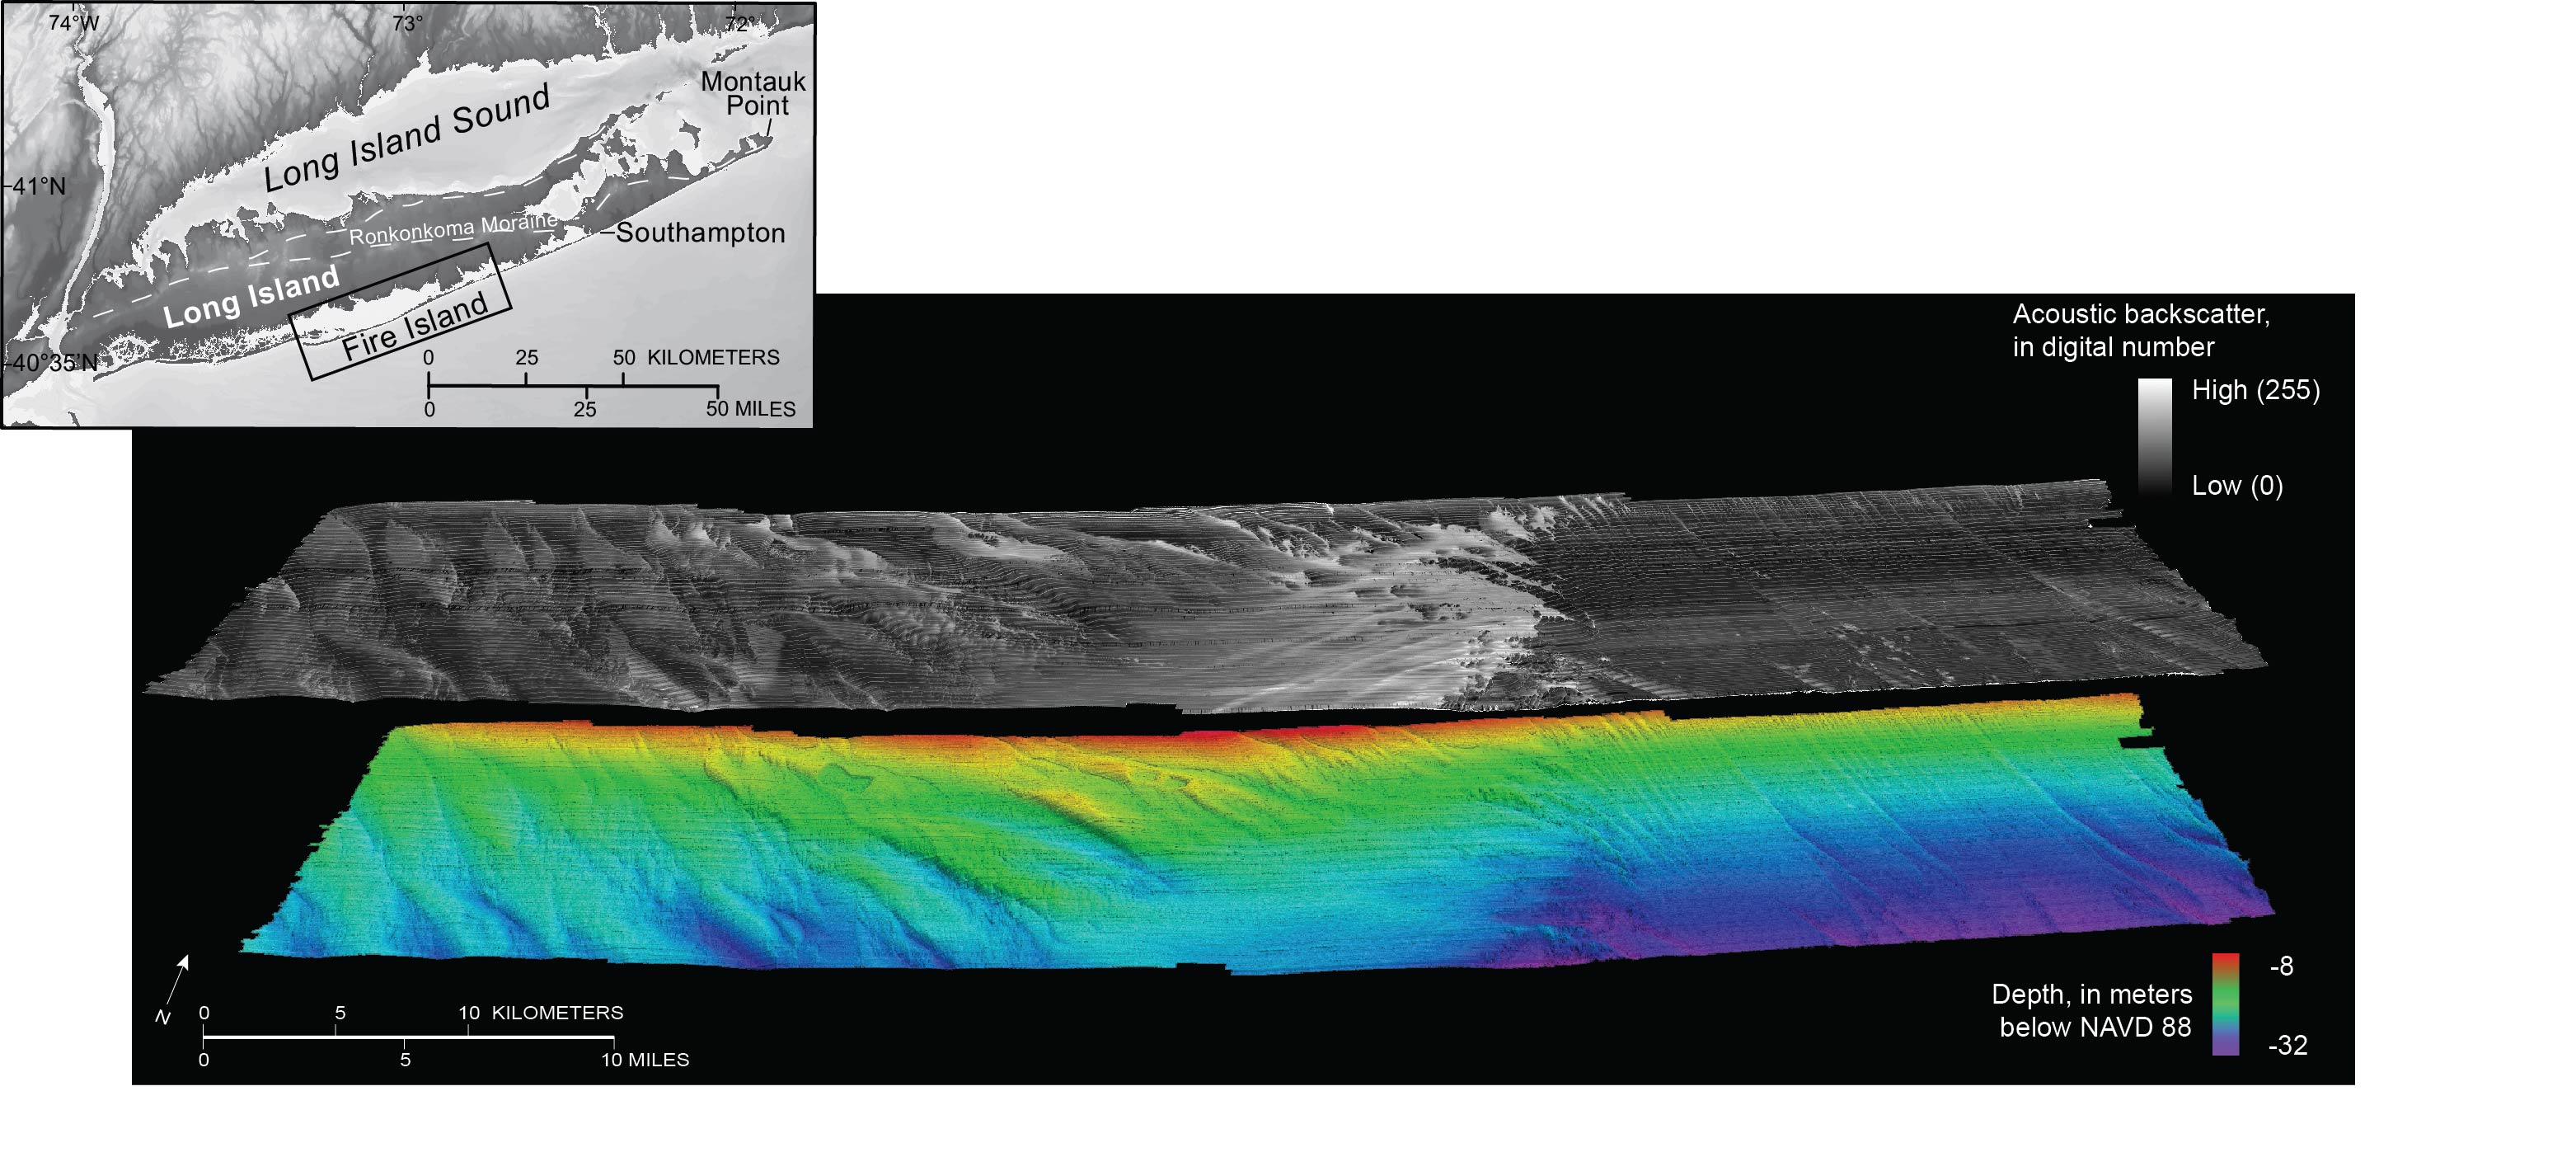 image showing survey location and backscatter and bathymetry collected offshore of Fire Island, NY